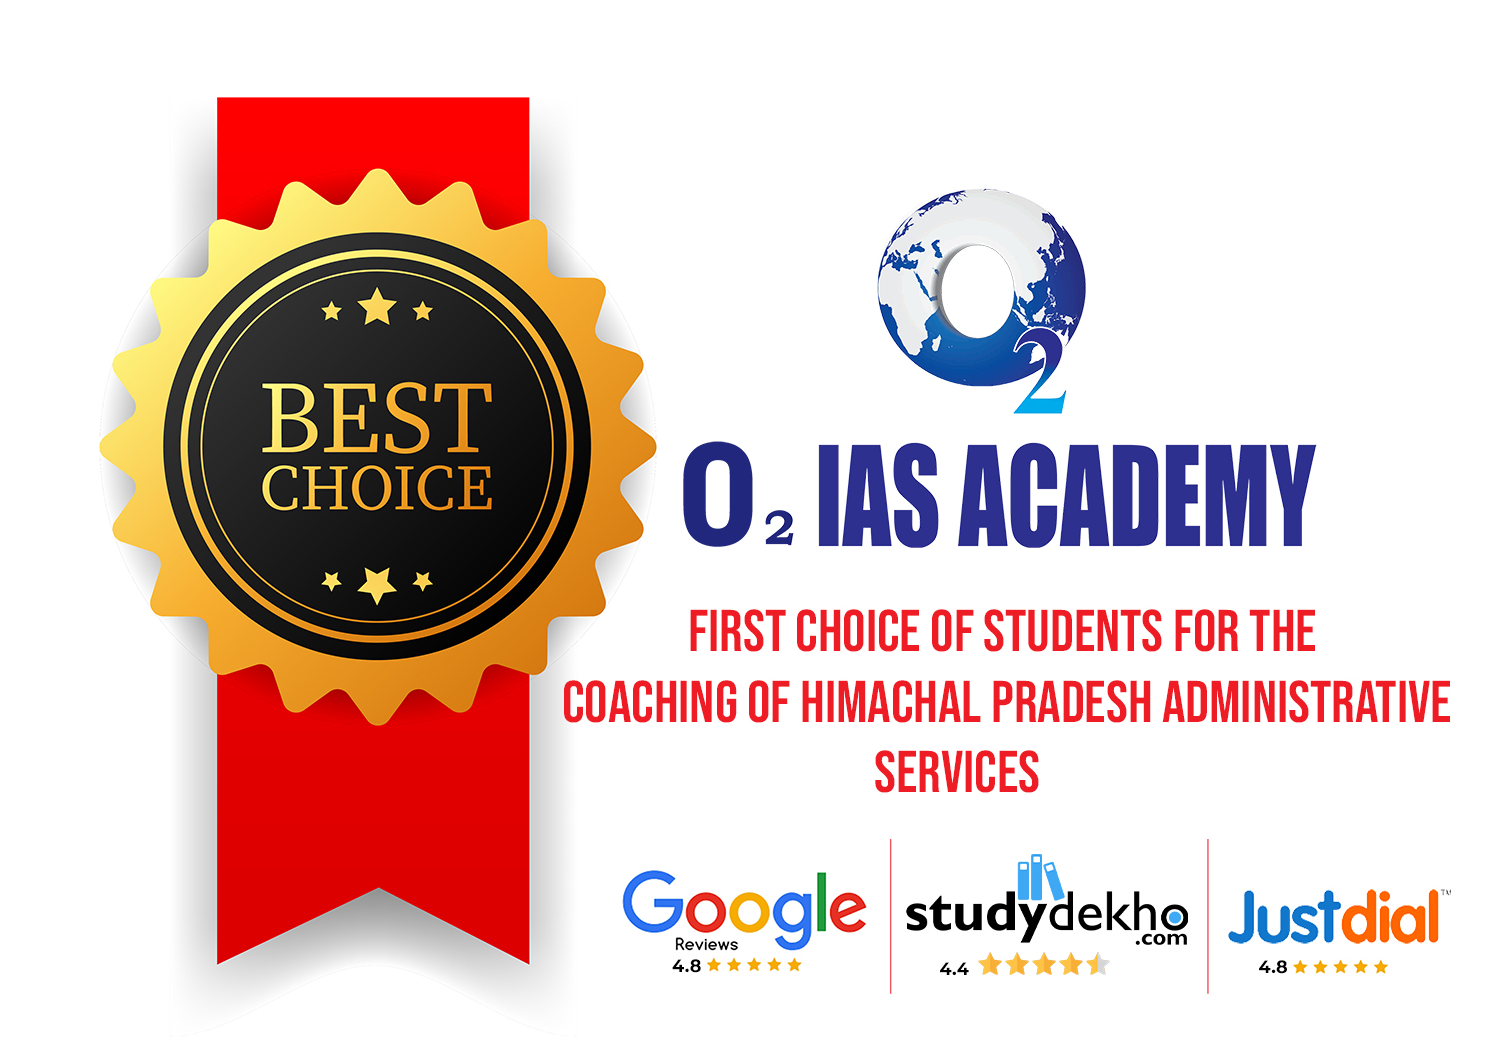 Best online Coaching for HPAS or HAS Exam Preparation